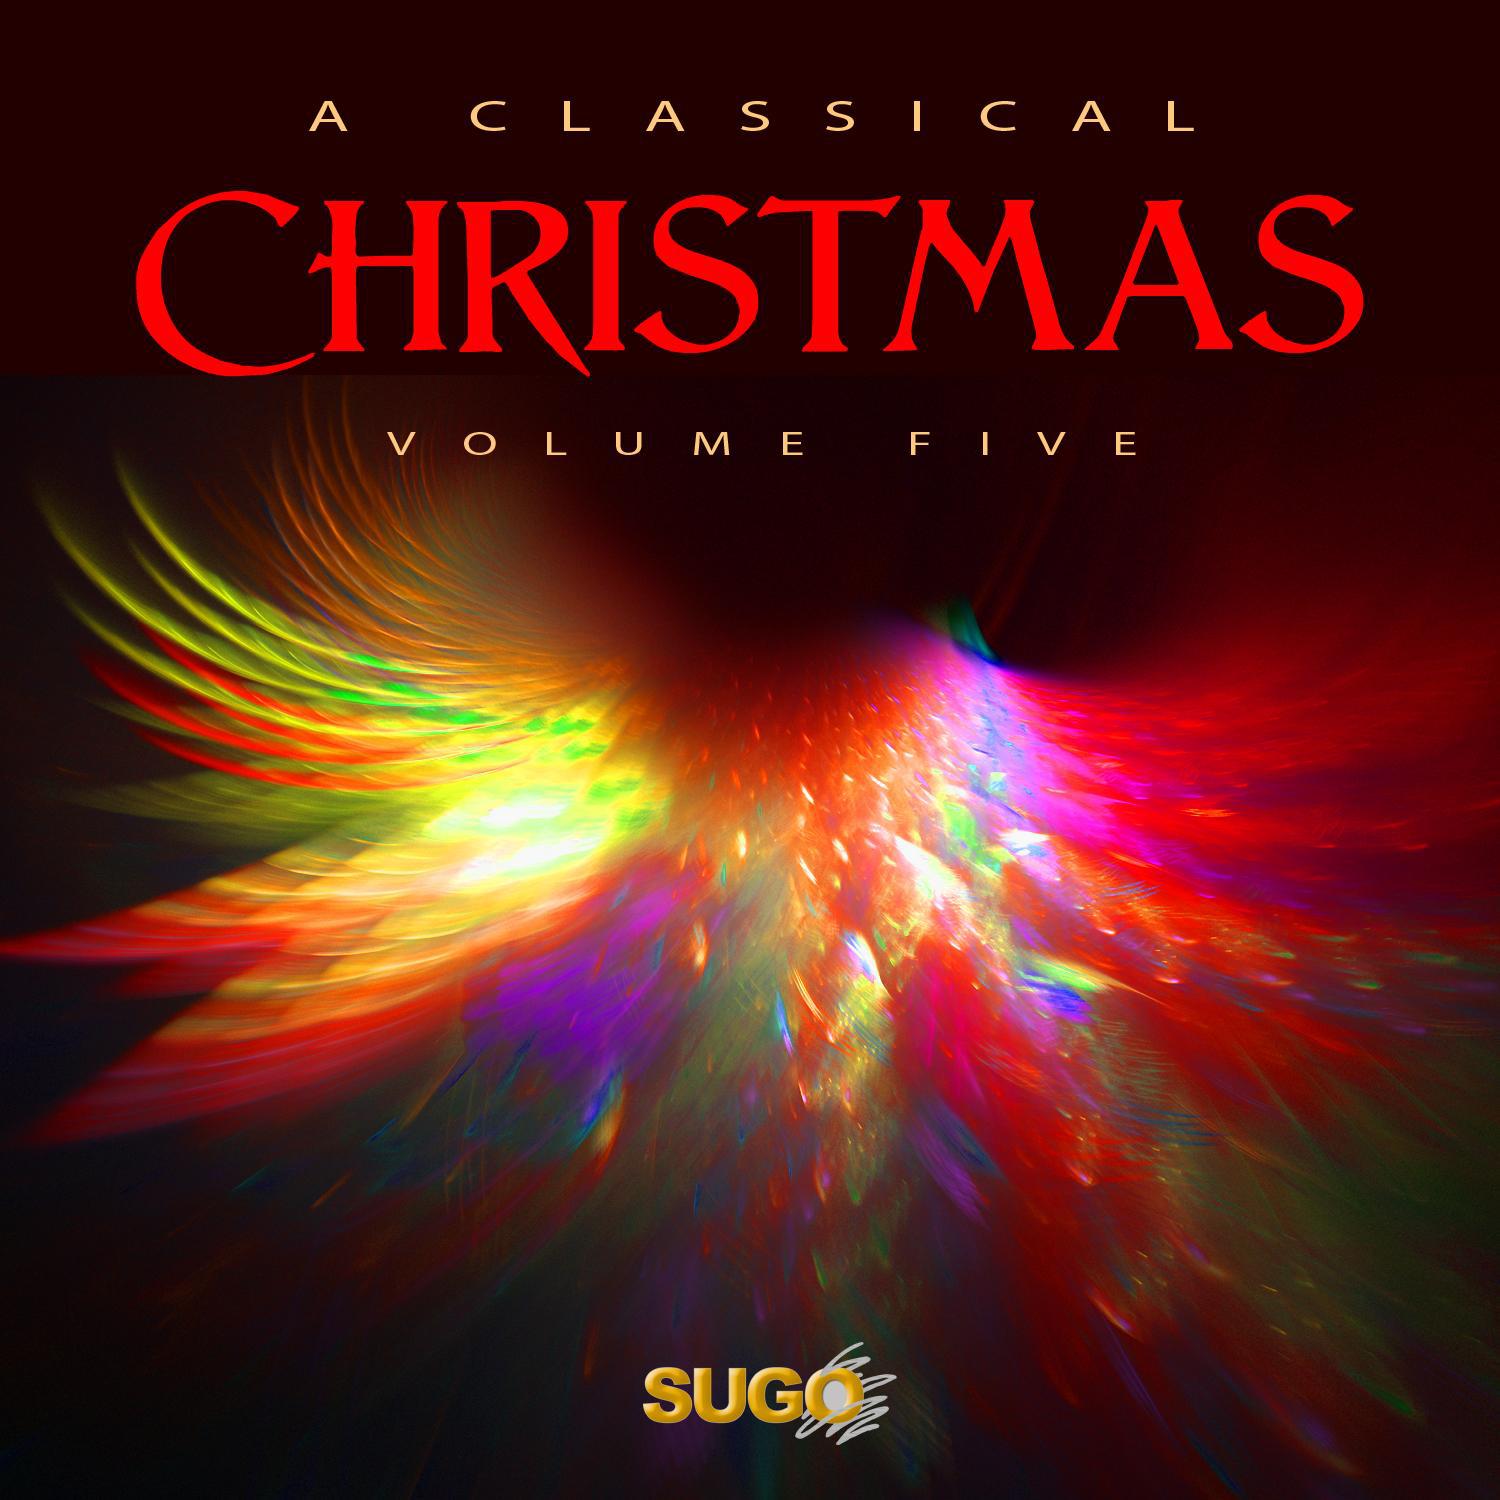 The Classical Christmas, Vol. 5